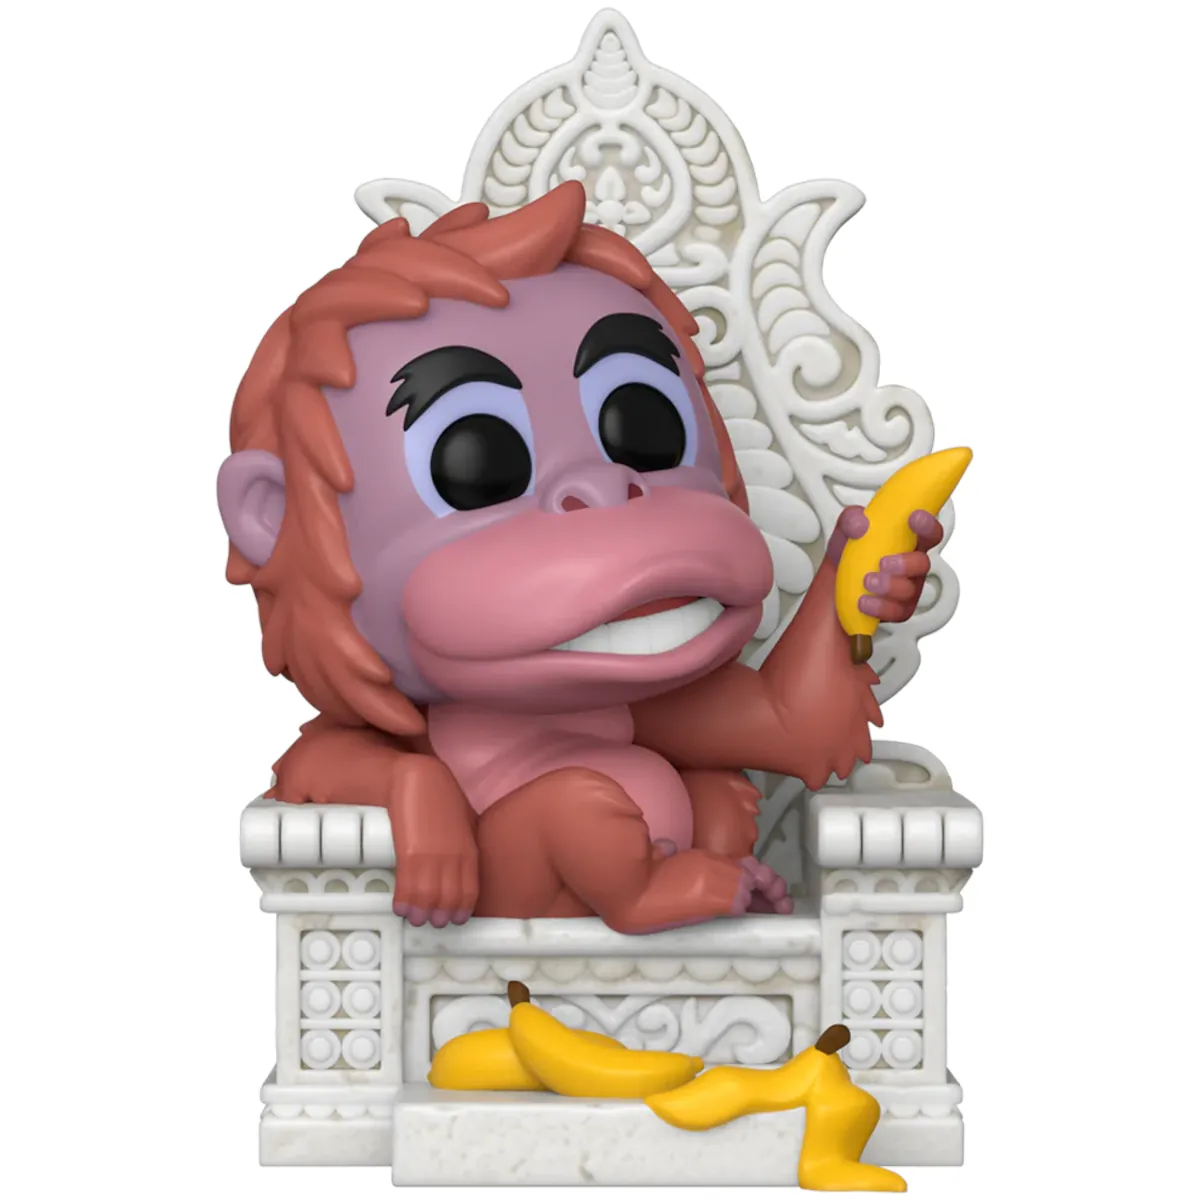 80785 Funko Pop! Deluxe - Disney The Jungle Book - King Louie on Throne Collectable Vinyl Figure